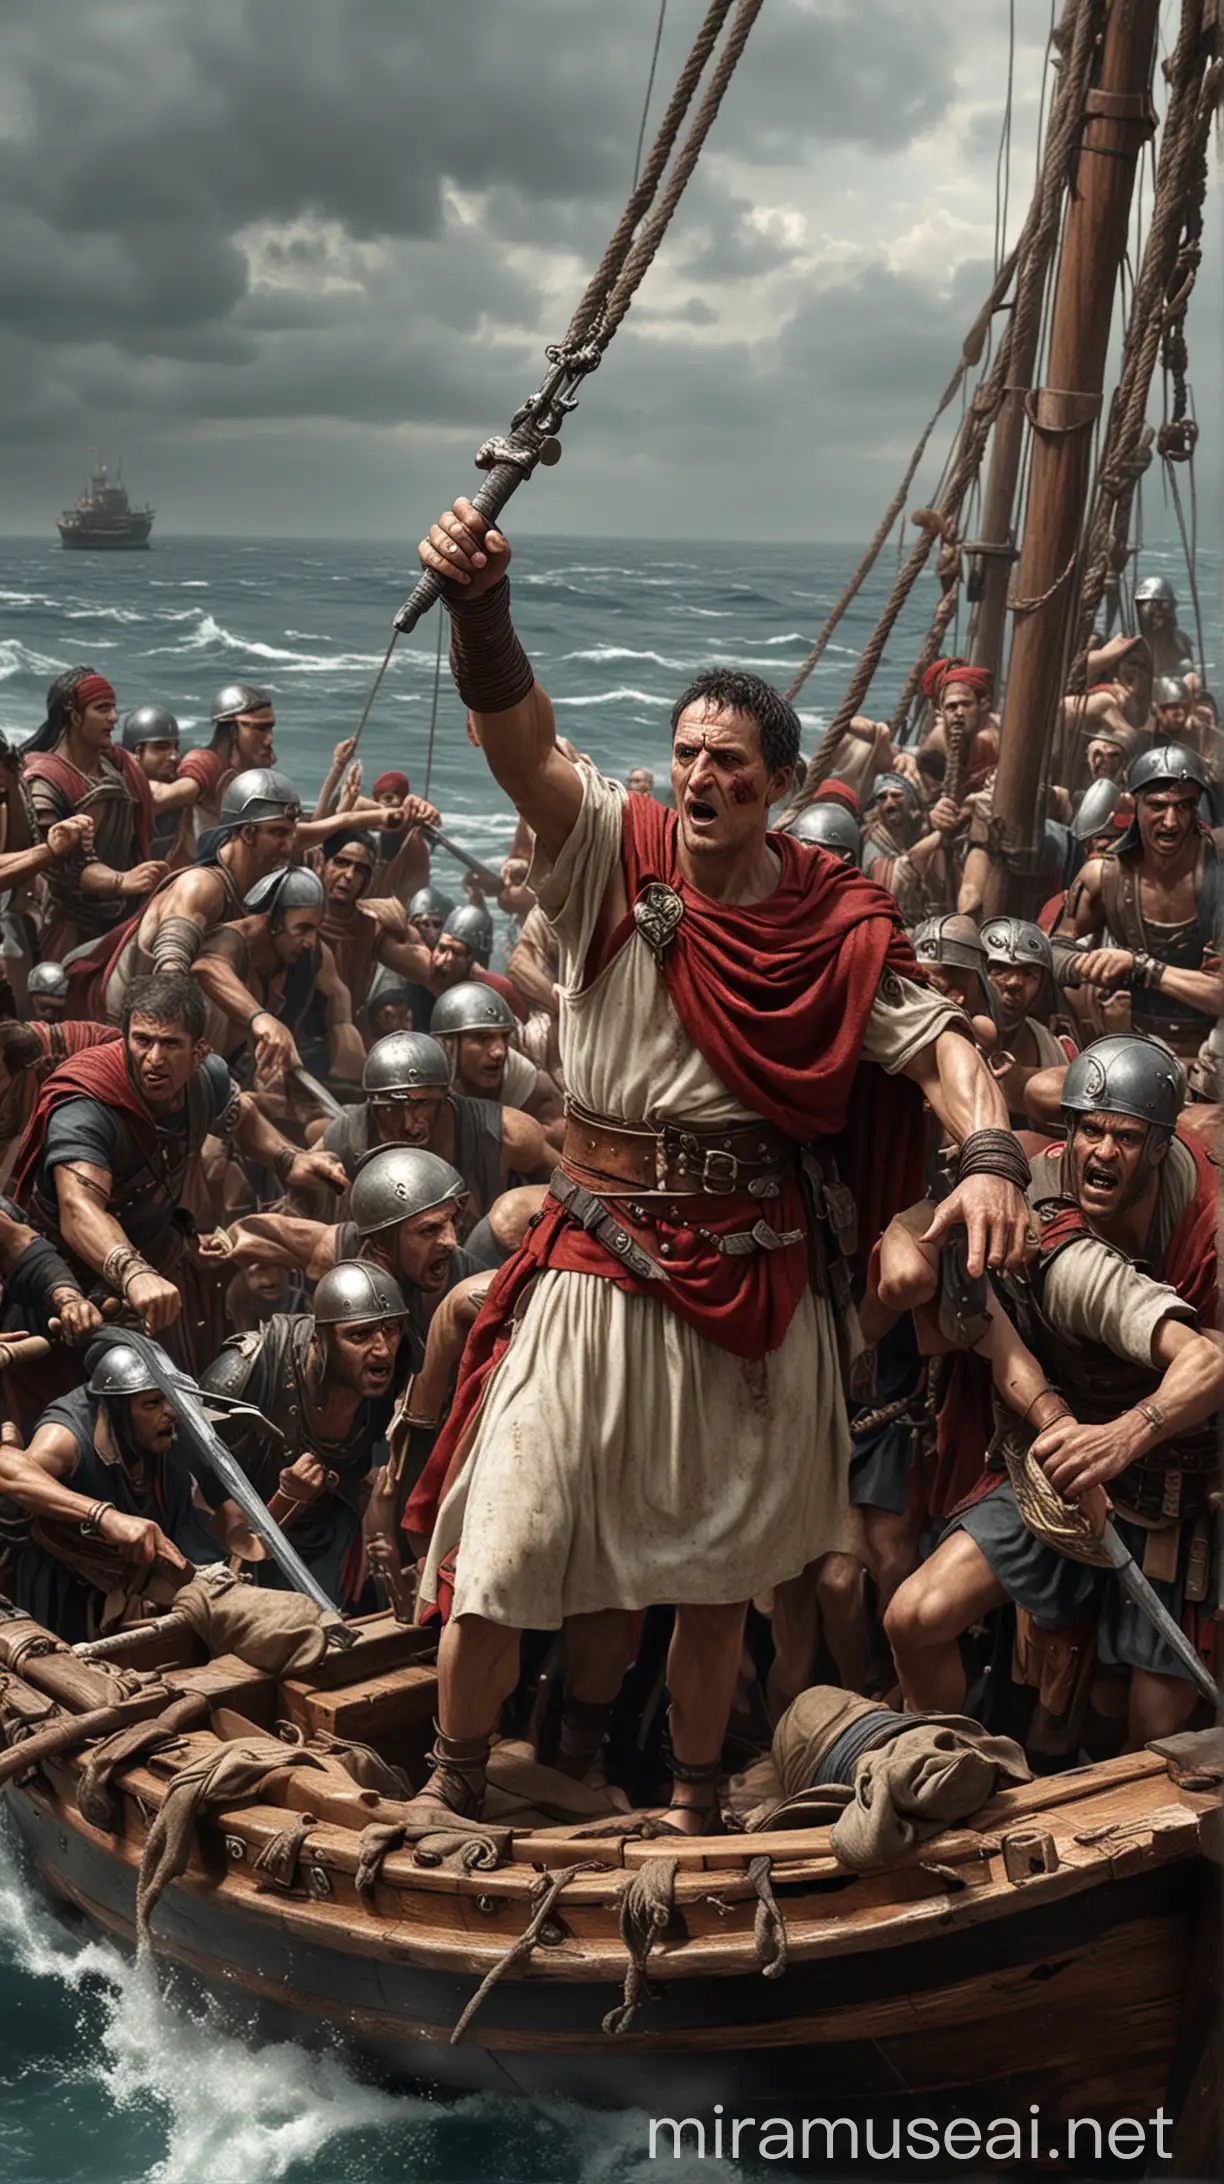 Julius Caesar being ambushed and captured by Cilician pirates on his ship. hyper realistic